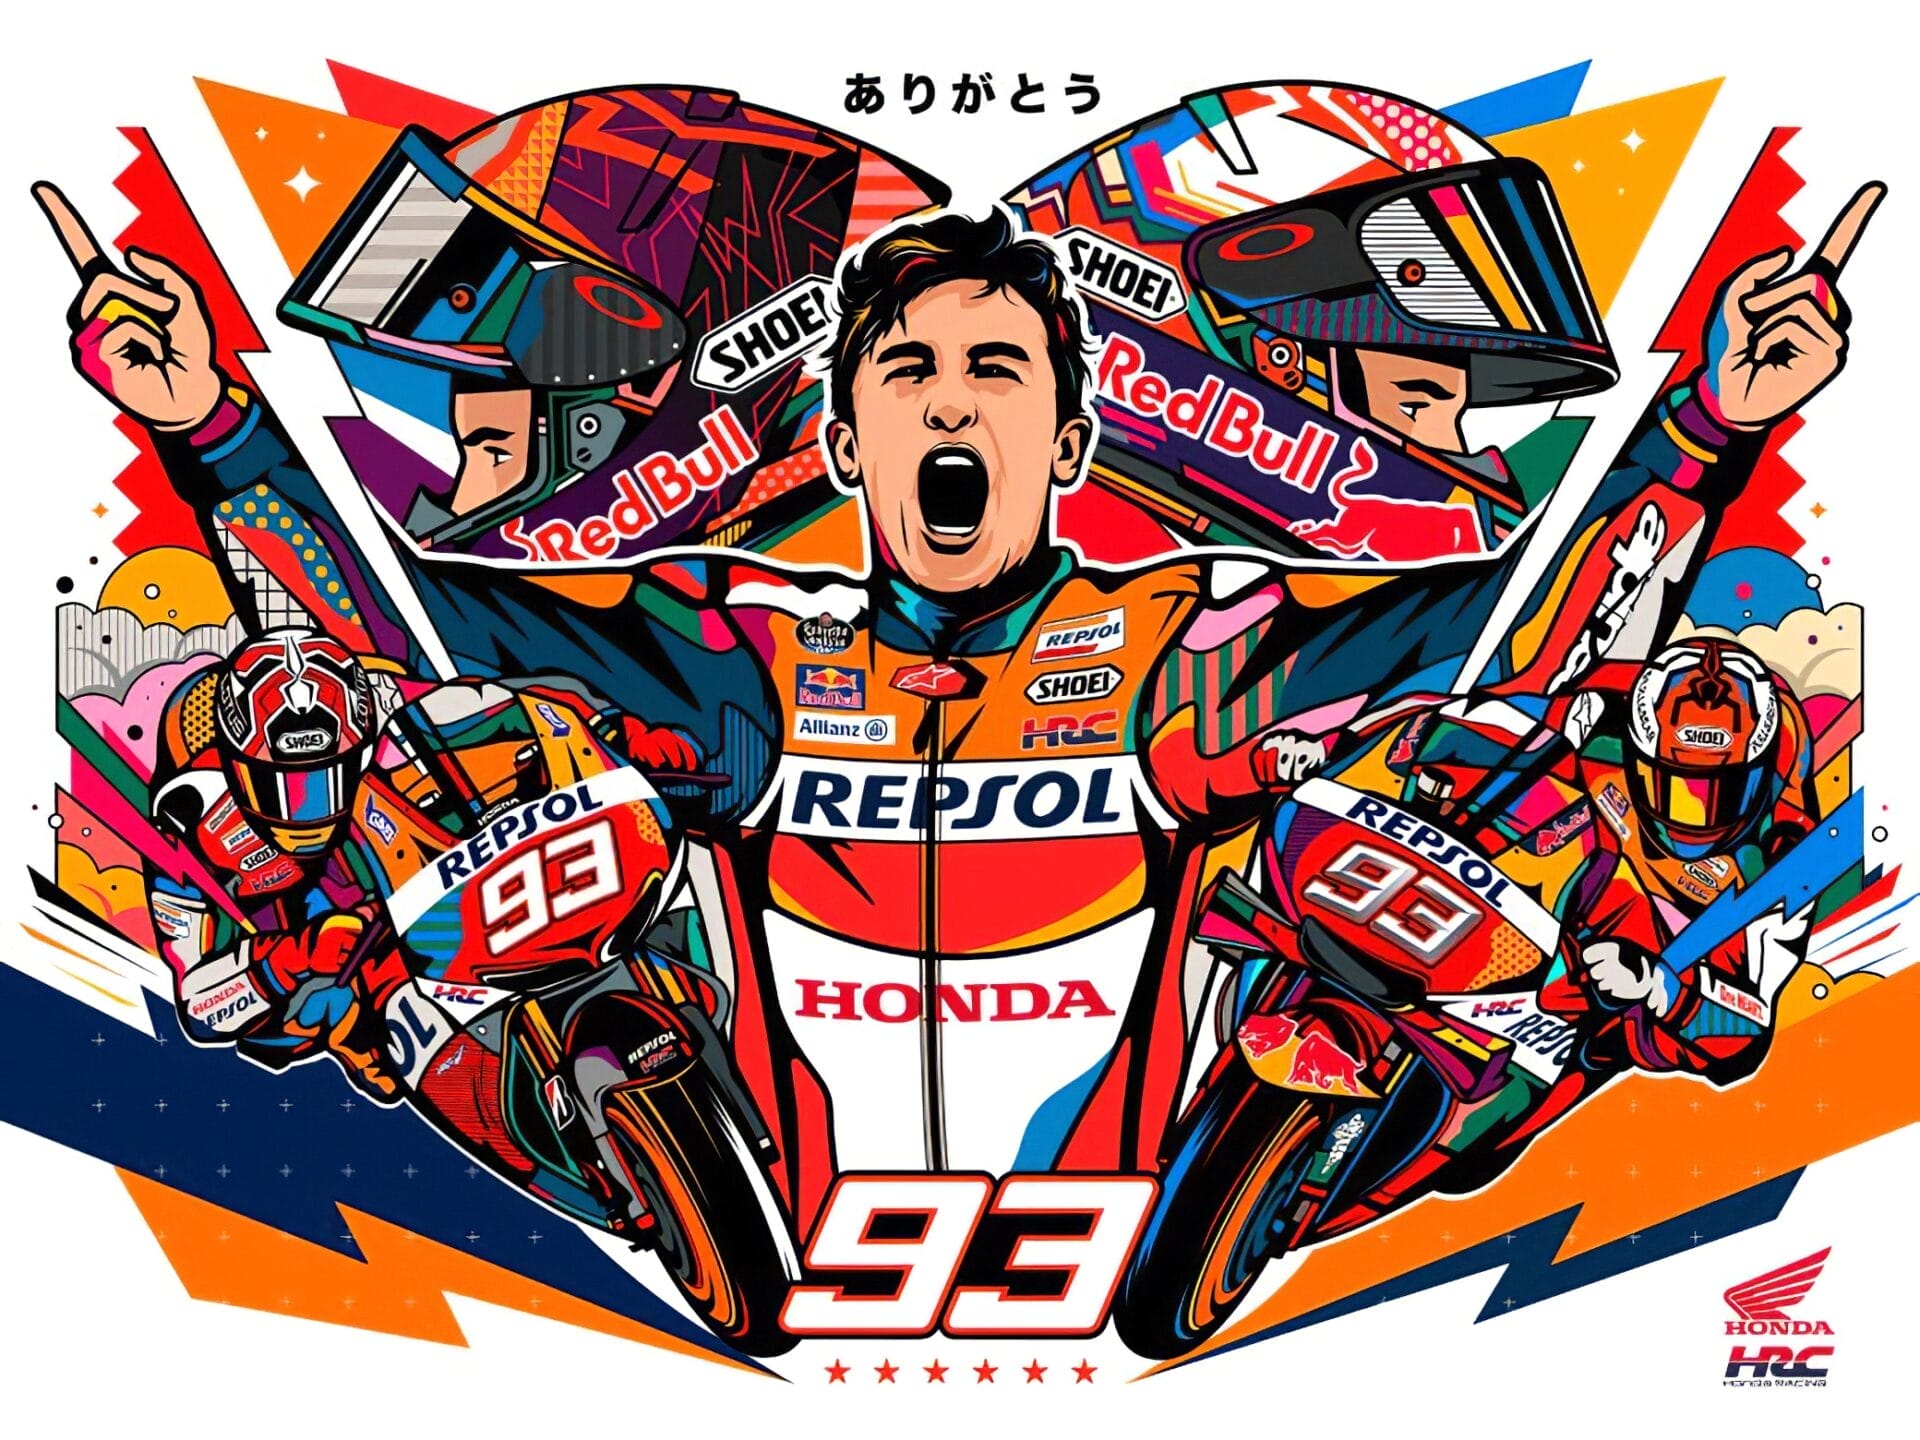 A farewell and a new beginning: Marc Marquez and the Repsol Honda Team